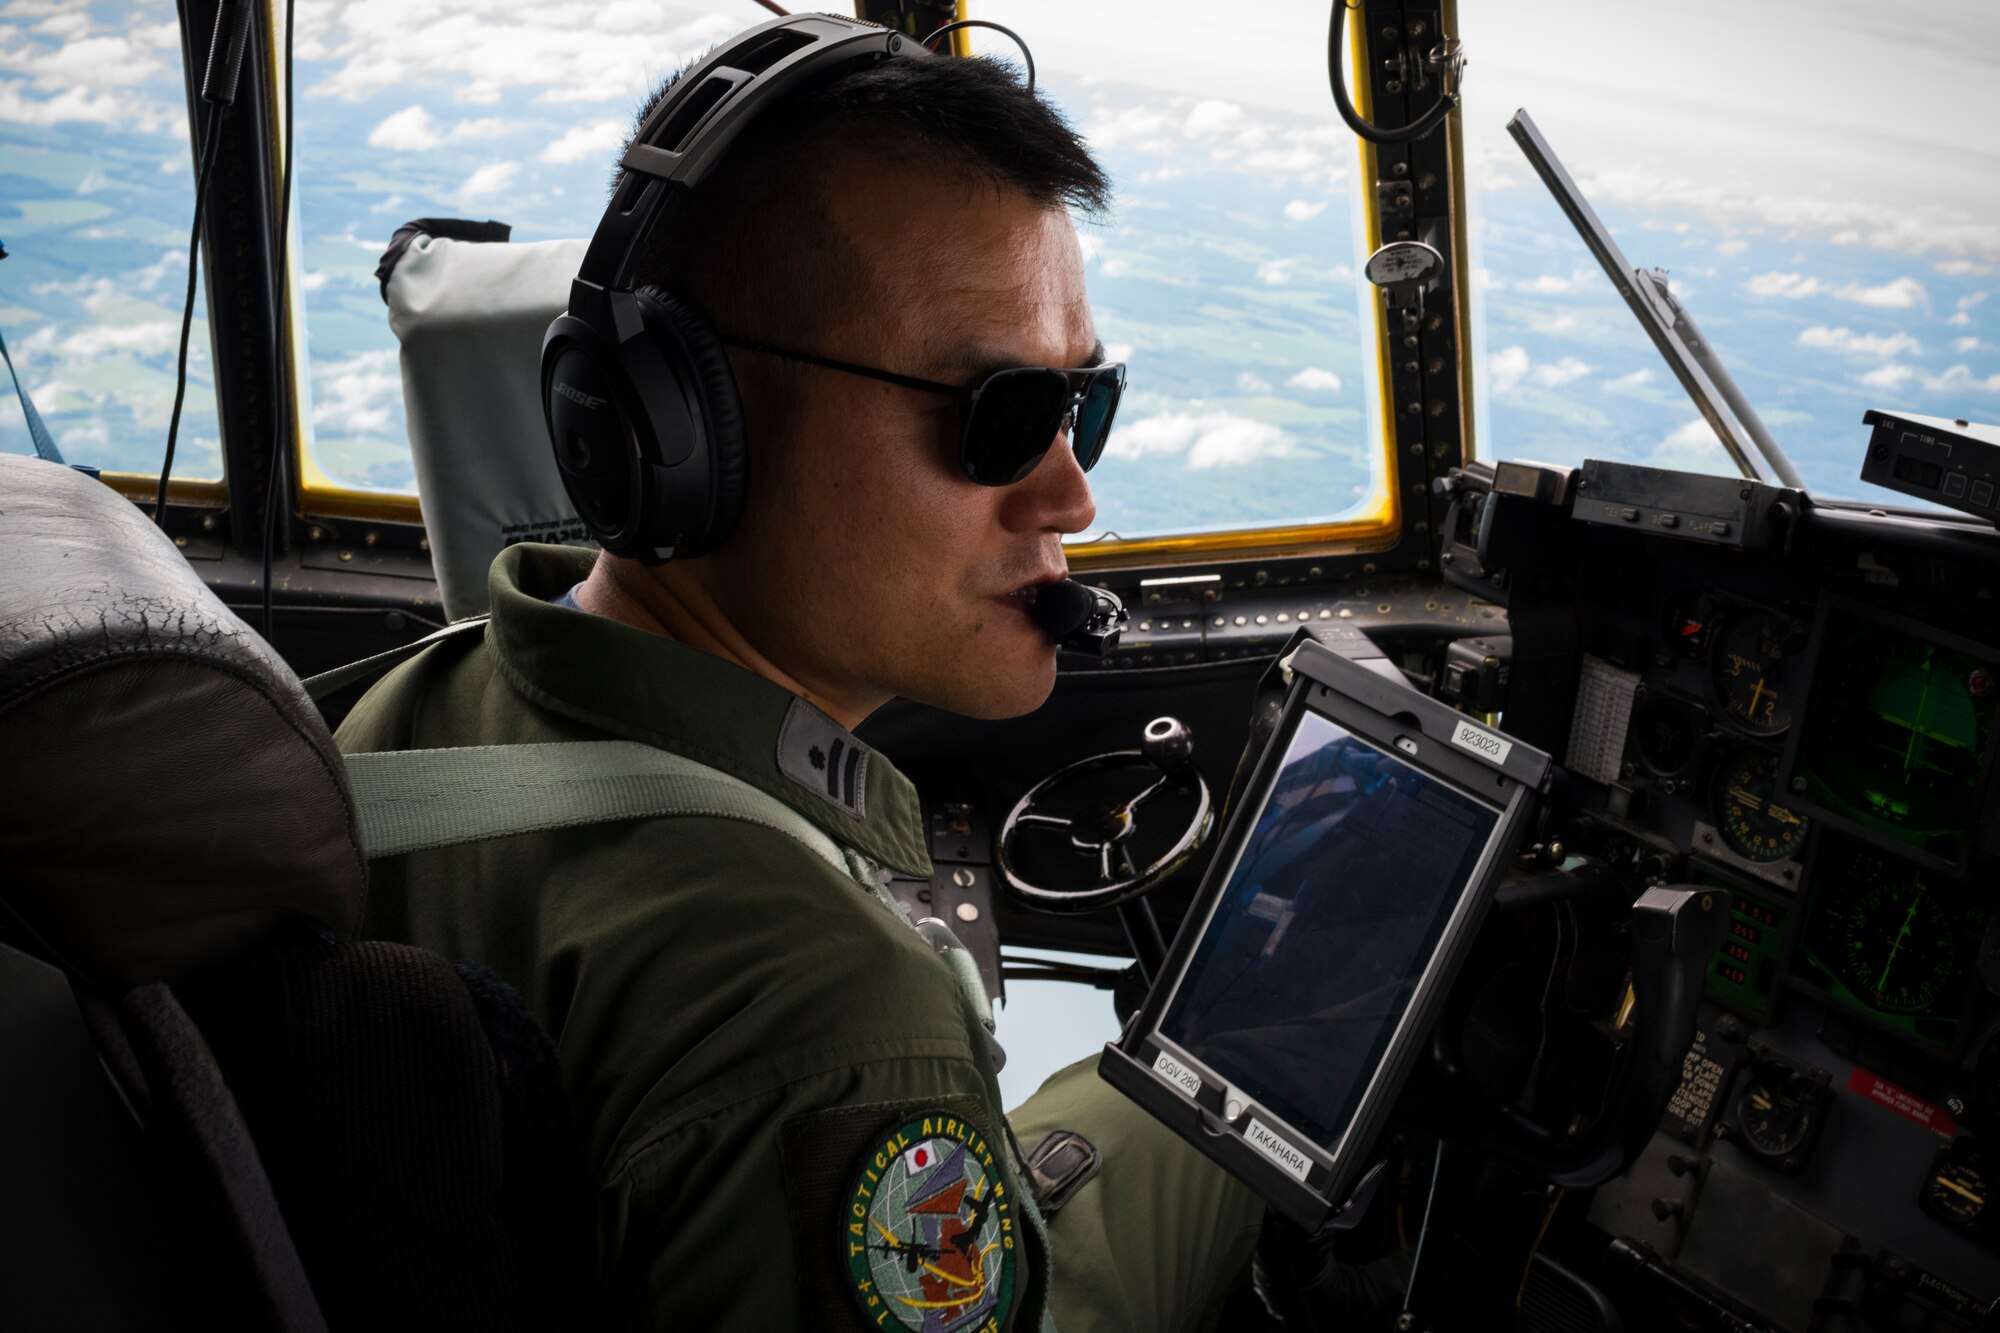 Maj. Kazunori Takahara, a pilot with the Japan Air-Self Defense Force’s 1st Tactical Airlift Wing, flight commands a 757th Airlift Squadron C-130H Hercules aircraft, July 22, 2020, over Northeast Ohio. Takahara is a participant in the Defense Personnel Exchange Program, where he will spend two and a half years assigned to the United States Air Force’s 910th Airlift Wing. The DPEP is designed to nurture the bonds of friendship and understanding that exist between the two air forces through the exchange of ideas and tactics by the members of each service.